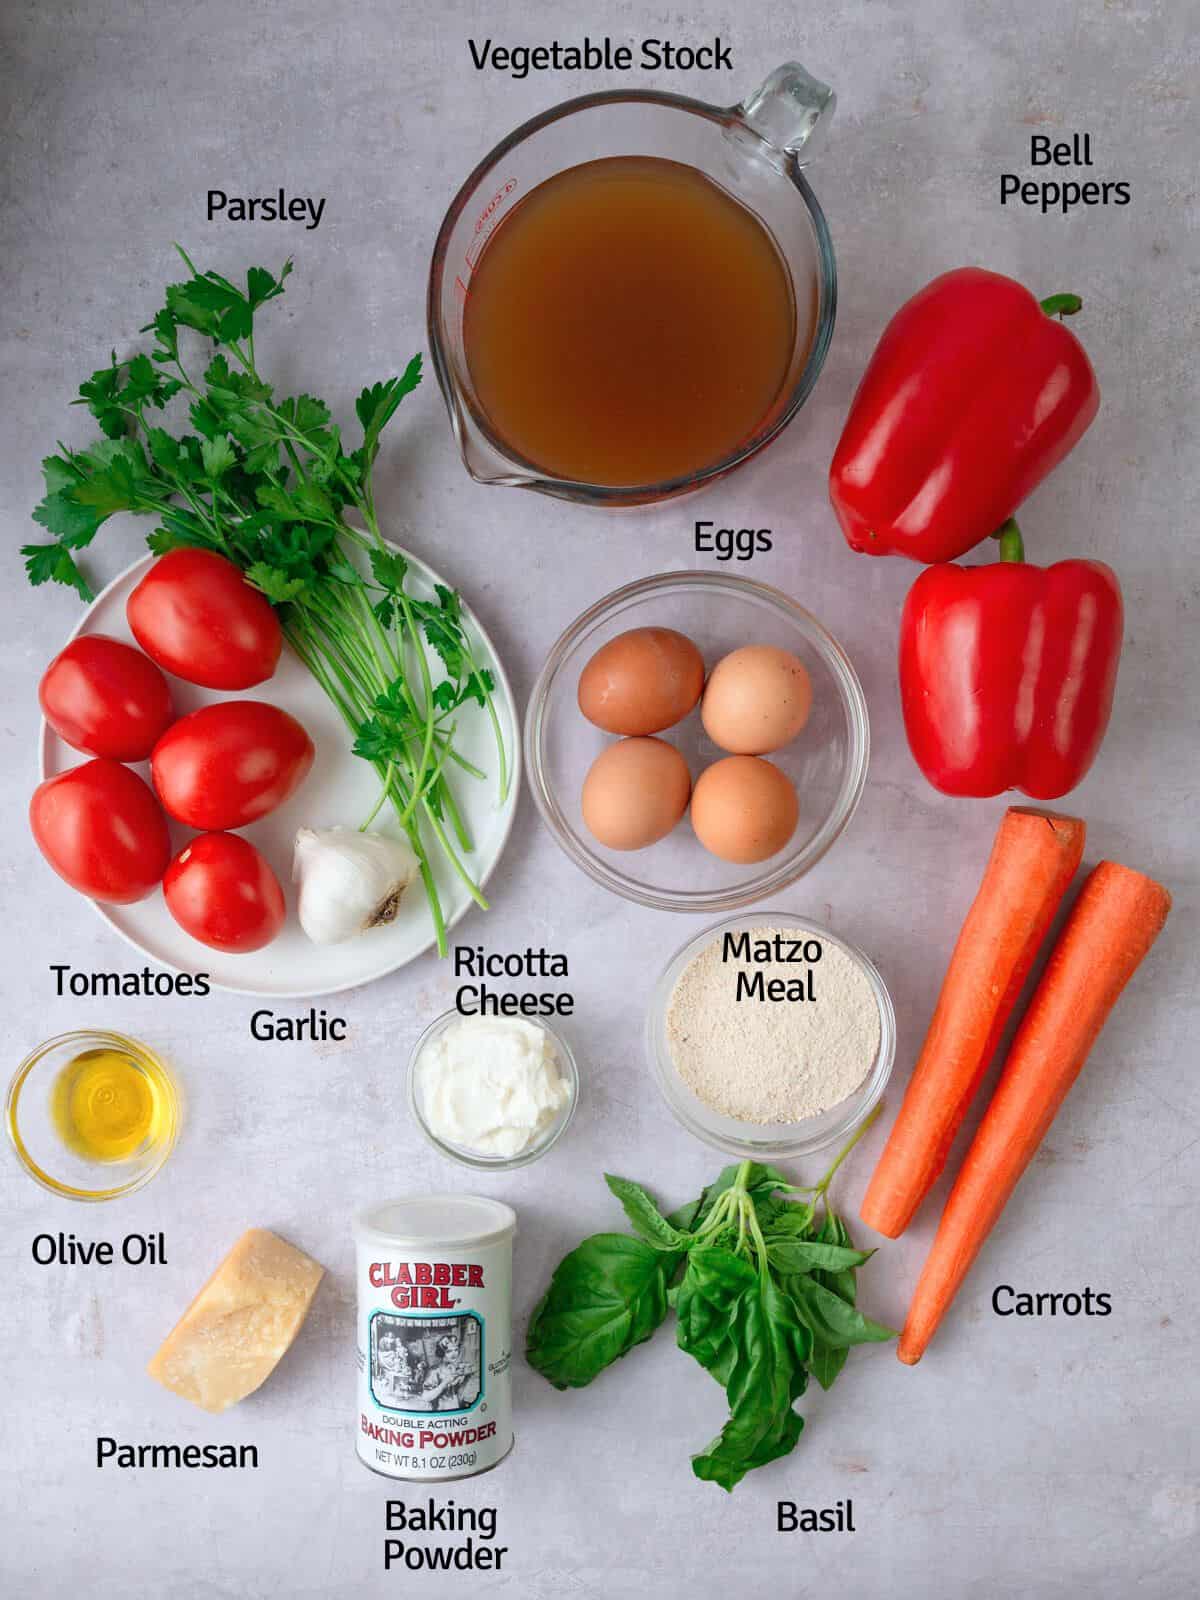 Ingredients for roasted tomato soup with matzo balls, including matzo meal, ricotta cheese, vegetables and stock.